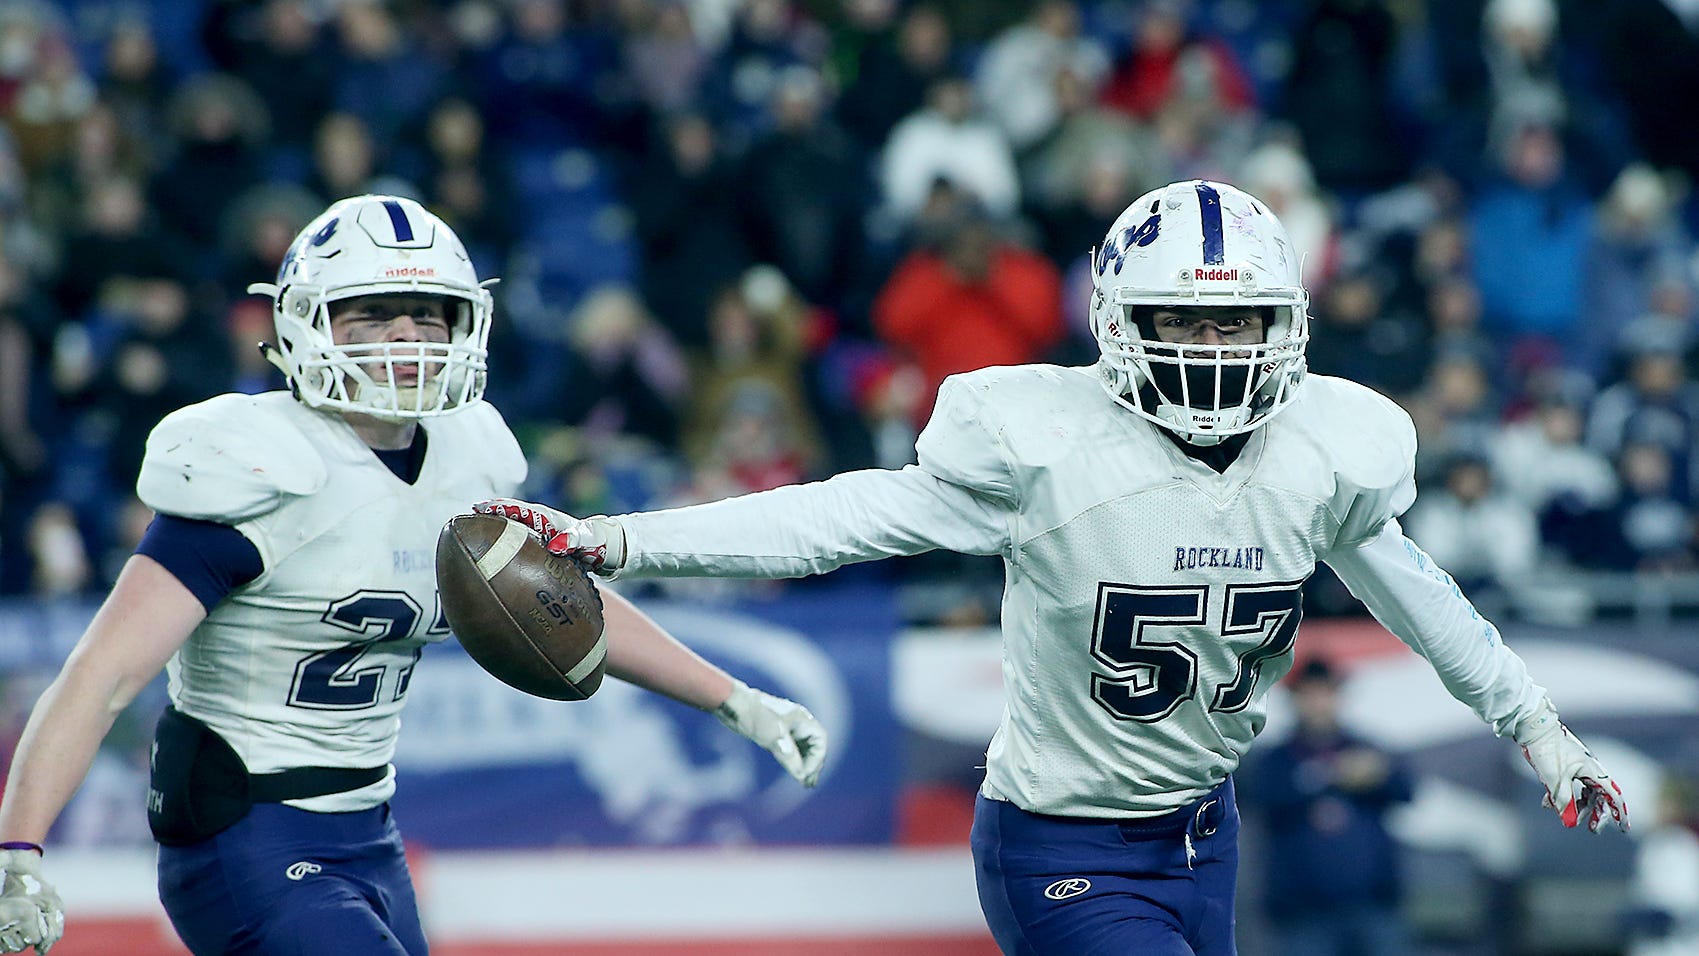 HIGH SCHOOL FOOTBALL: Pinheiro, Coulstring get defensive in Rockland's Super Bowl win